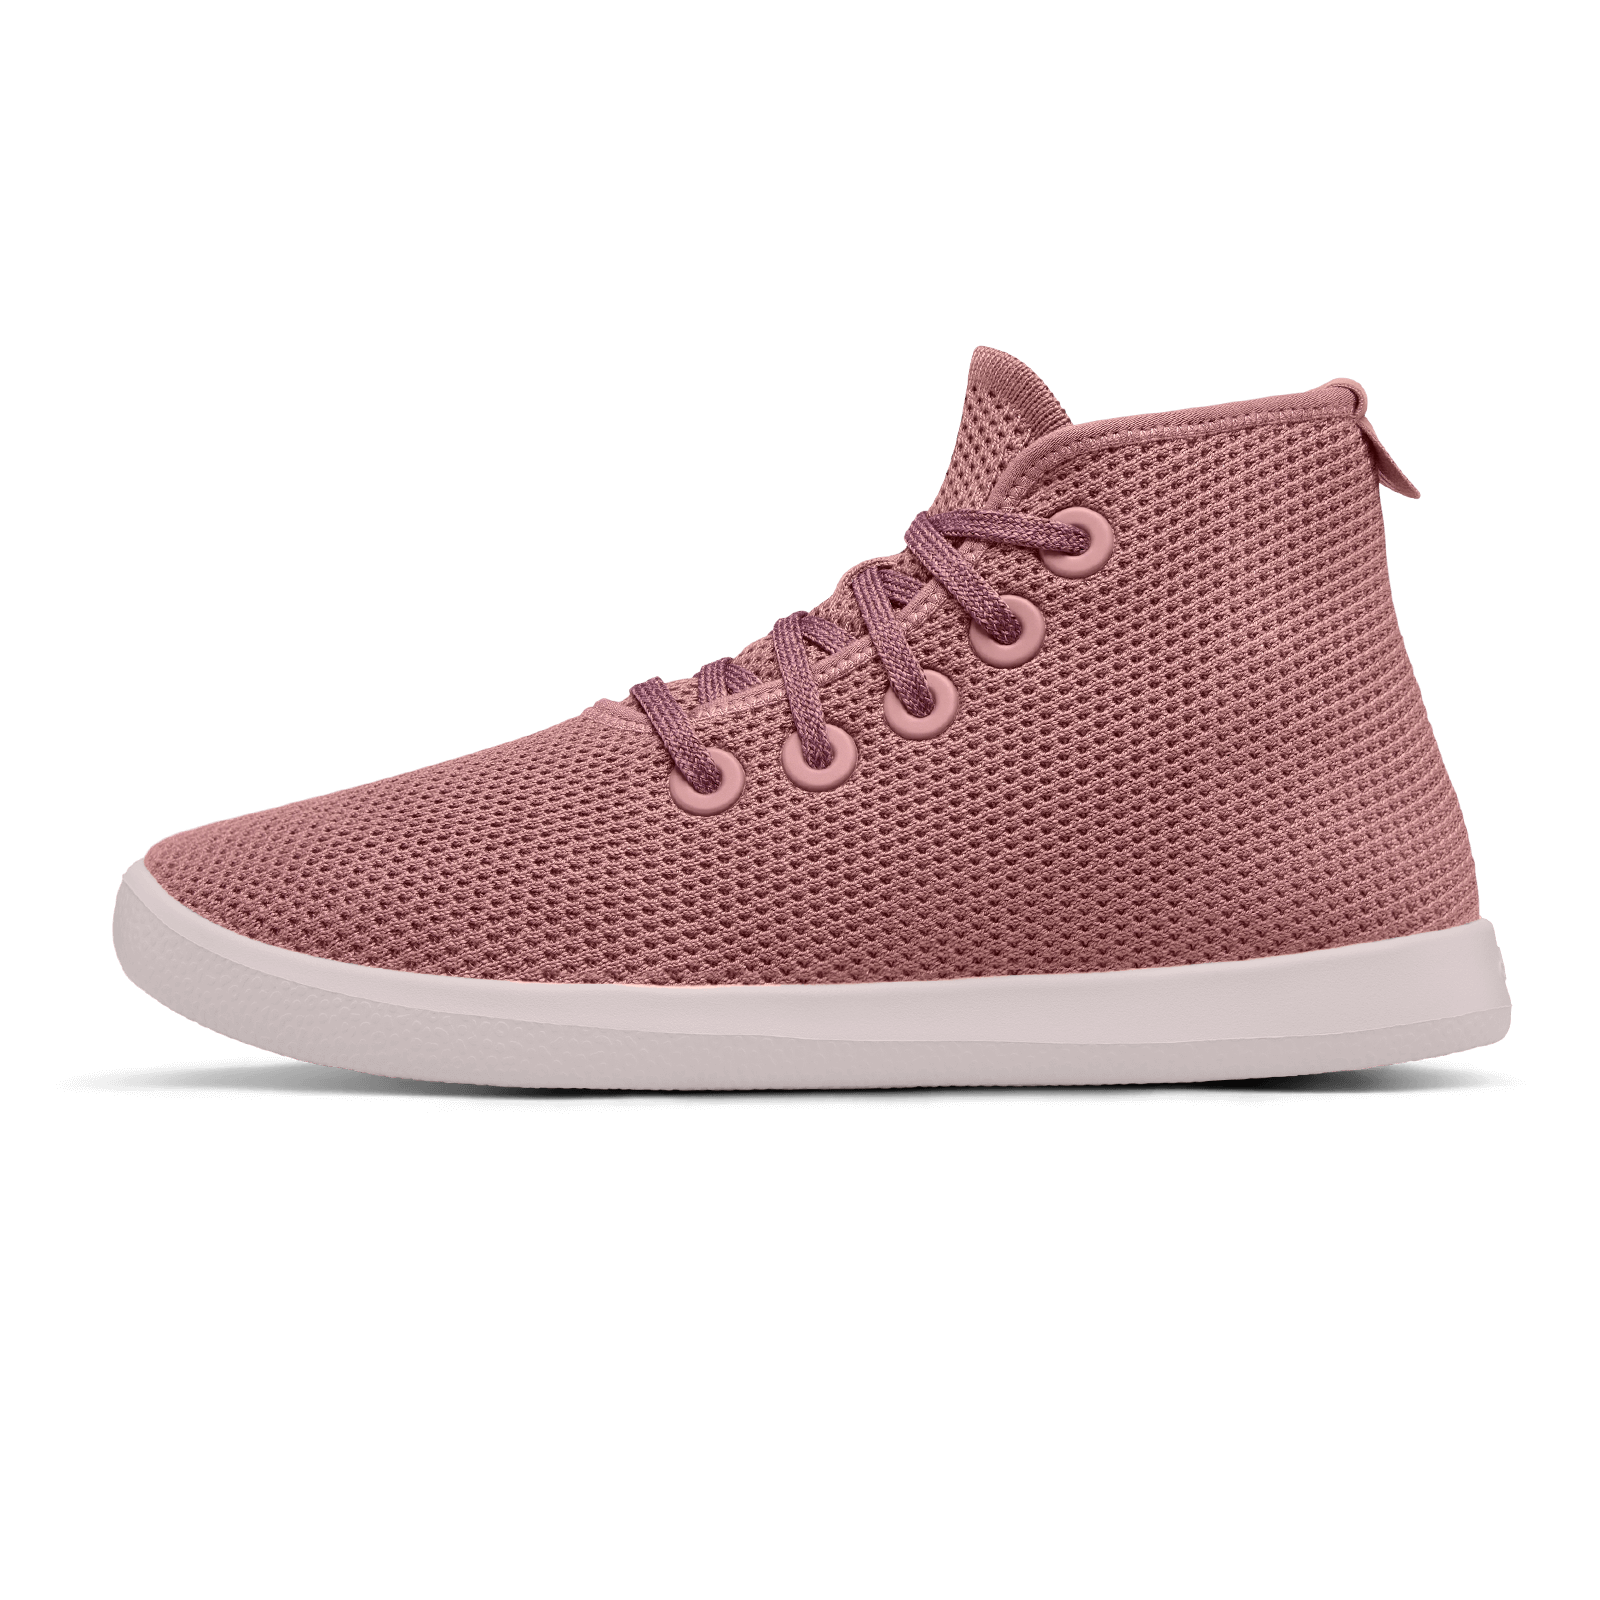 Women's Tree Toppers - Harvest (Rose Sole)